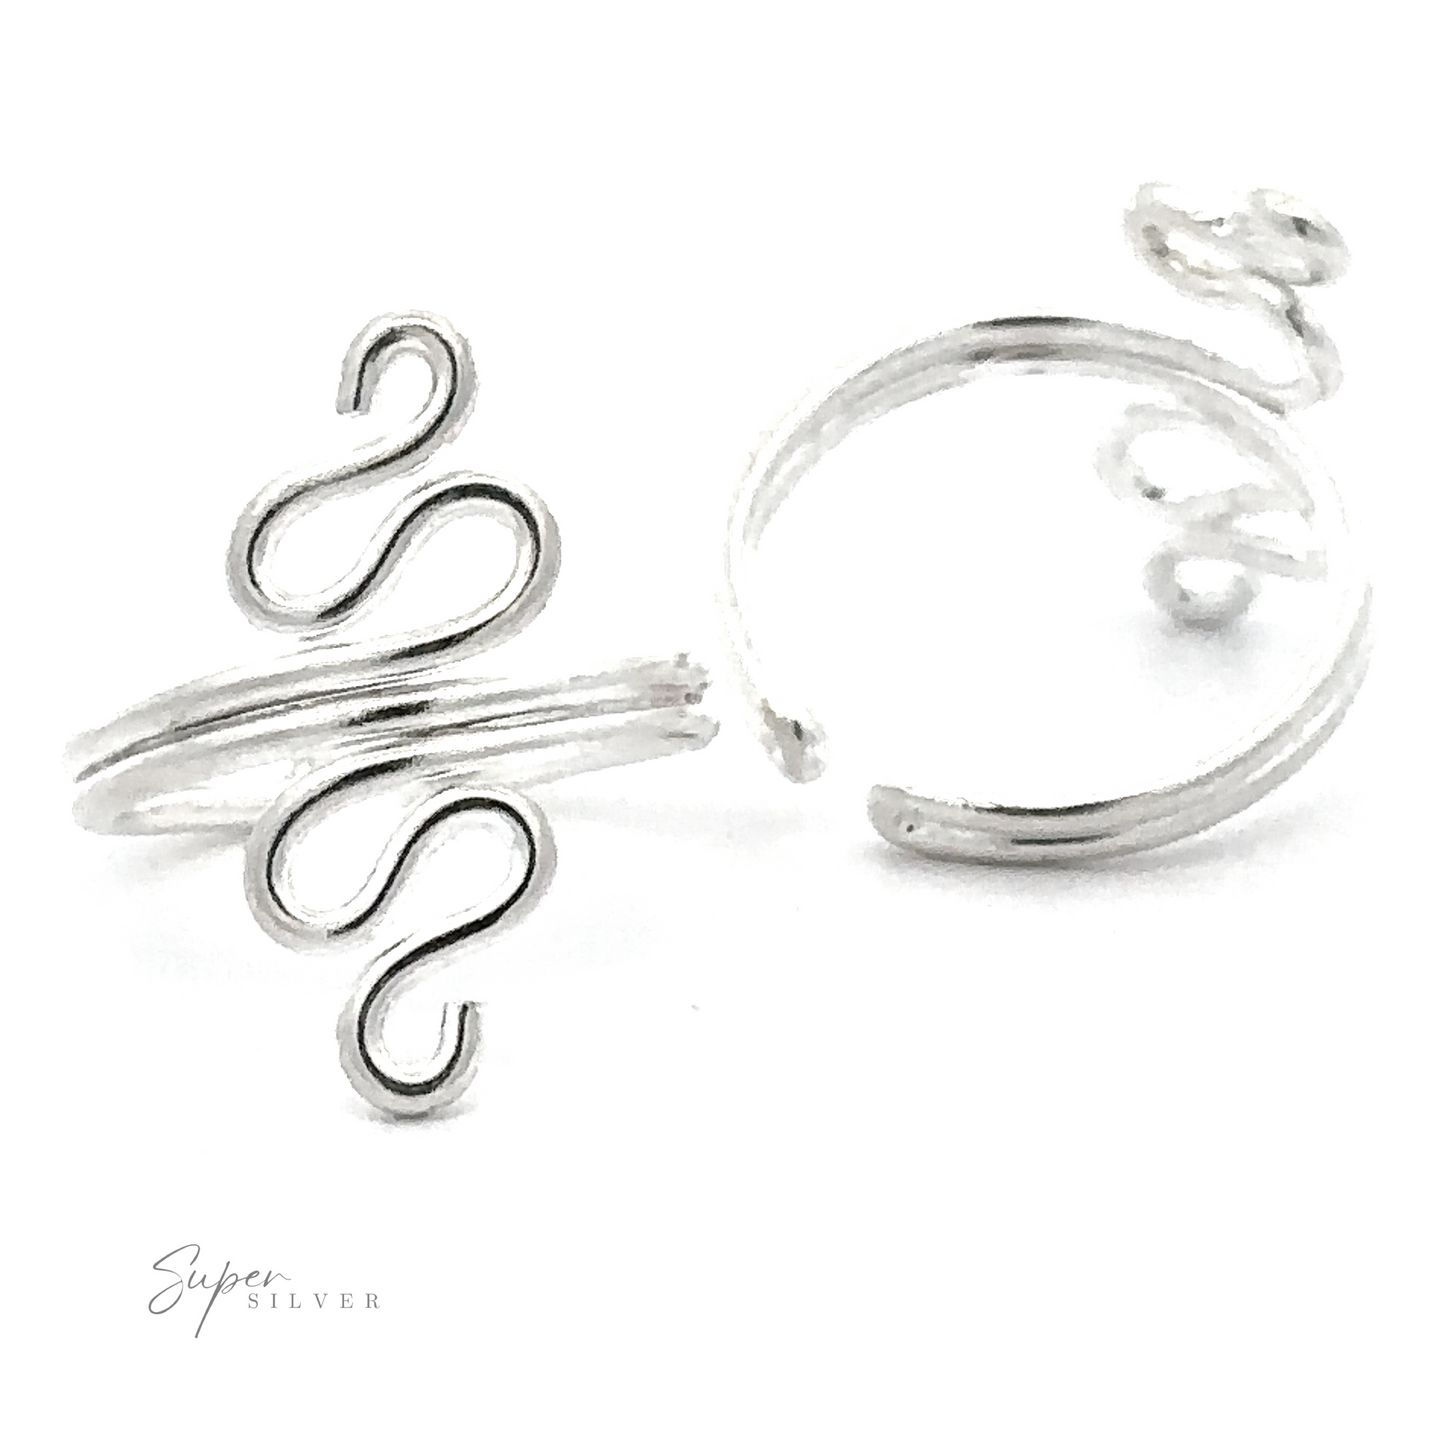 Squiggly adjustable toe ring with a snake design, displayed on a white background with the text "super silver" visible.